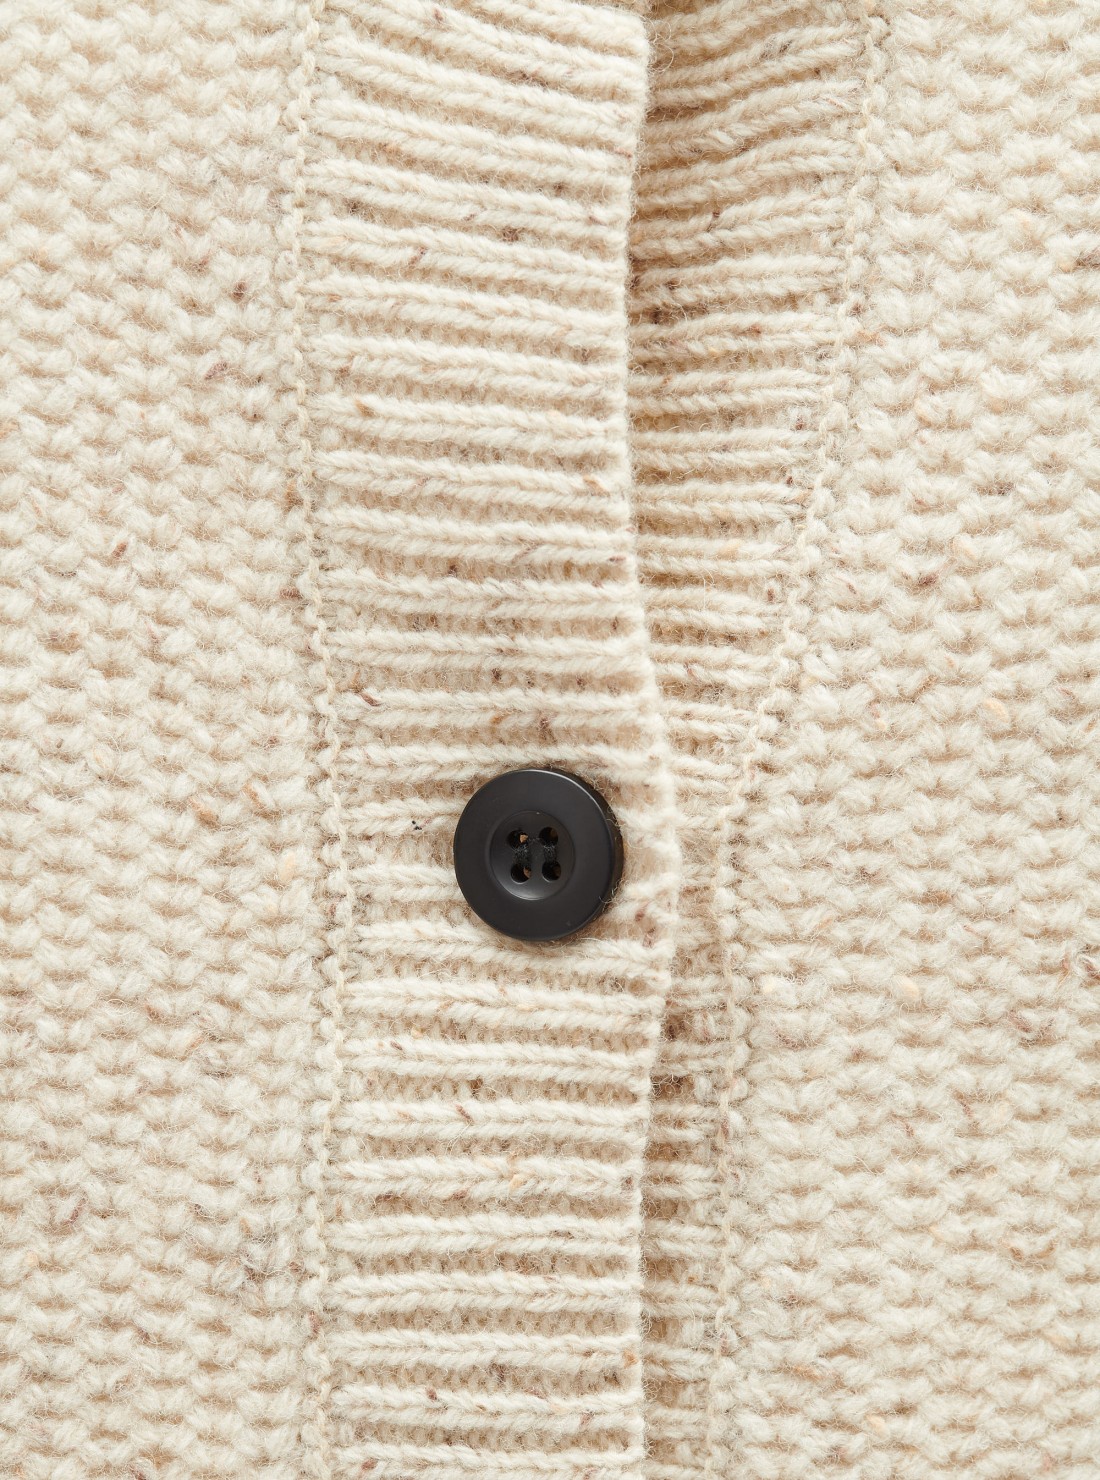 Knitted Crew-neck Cardigan